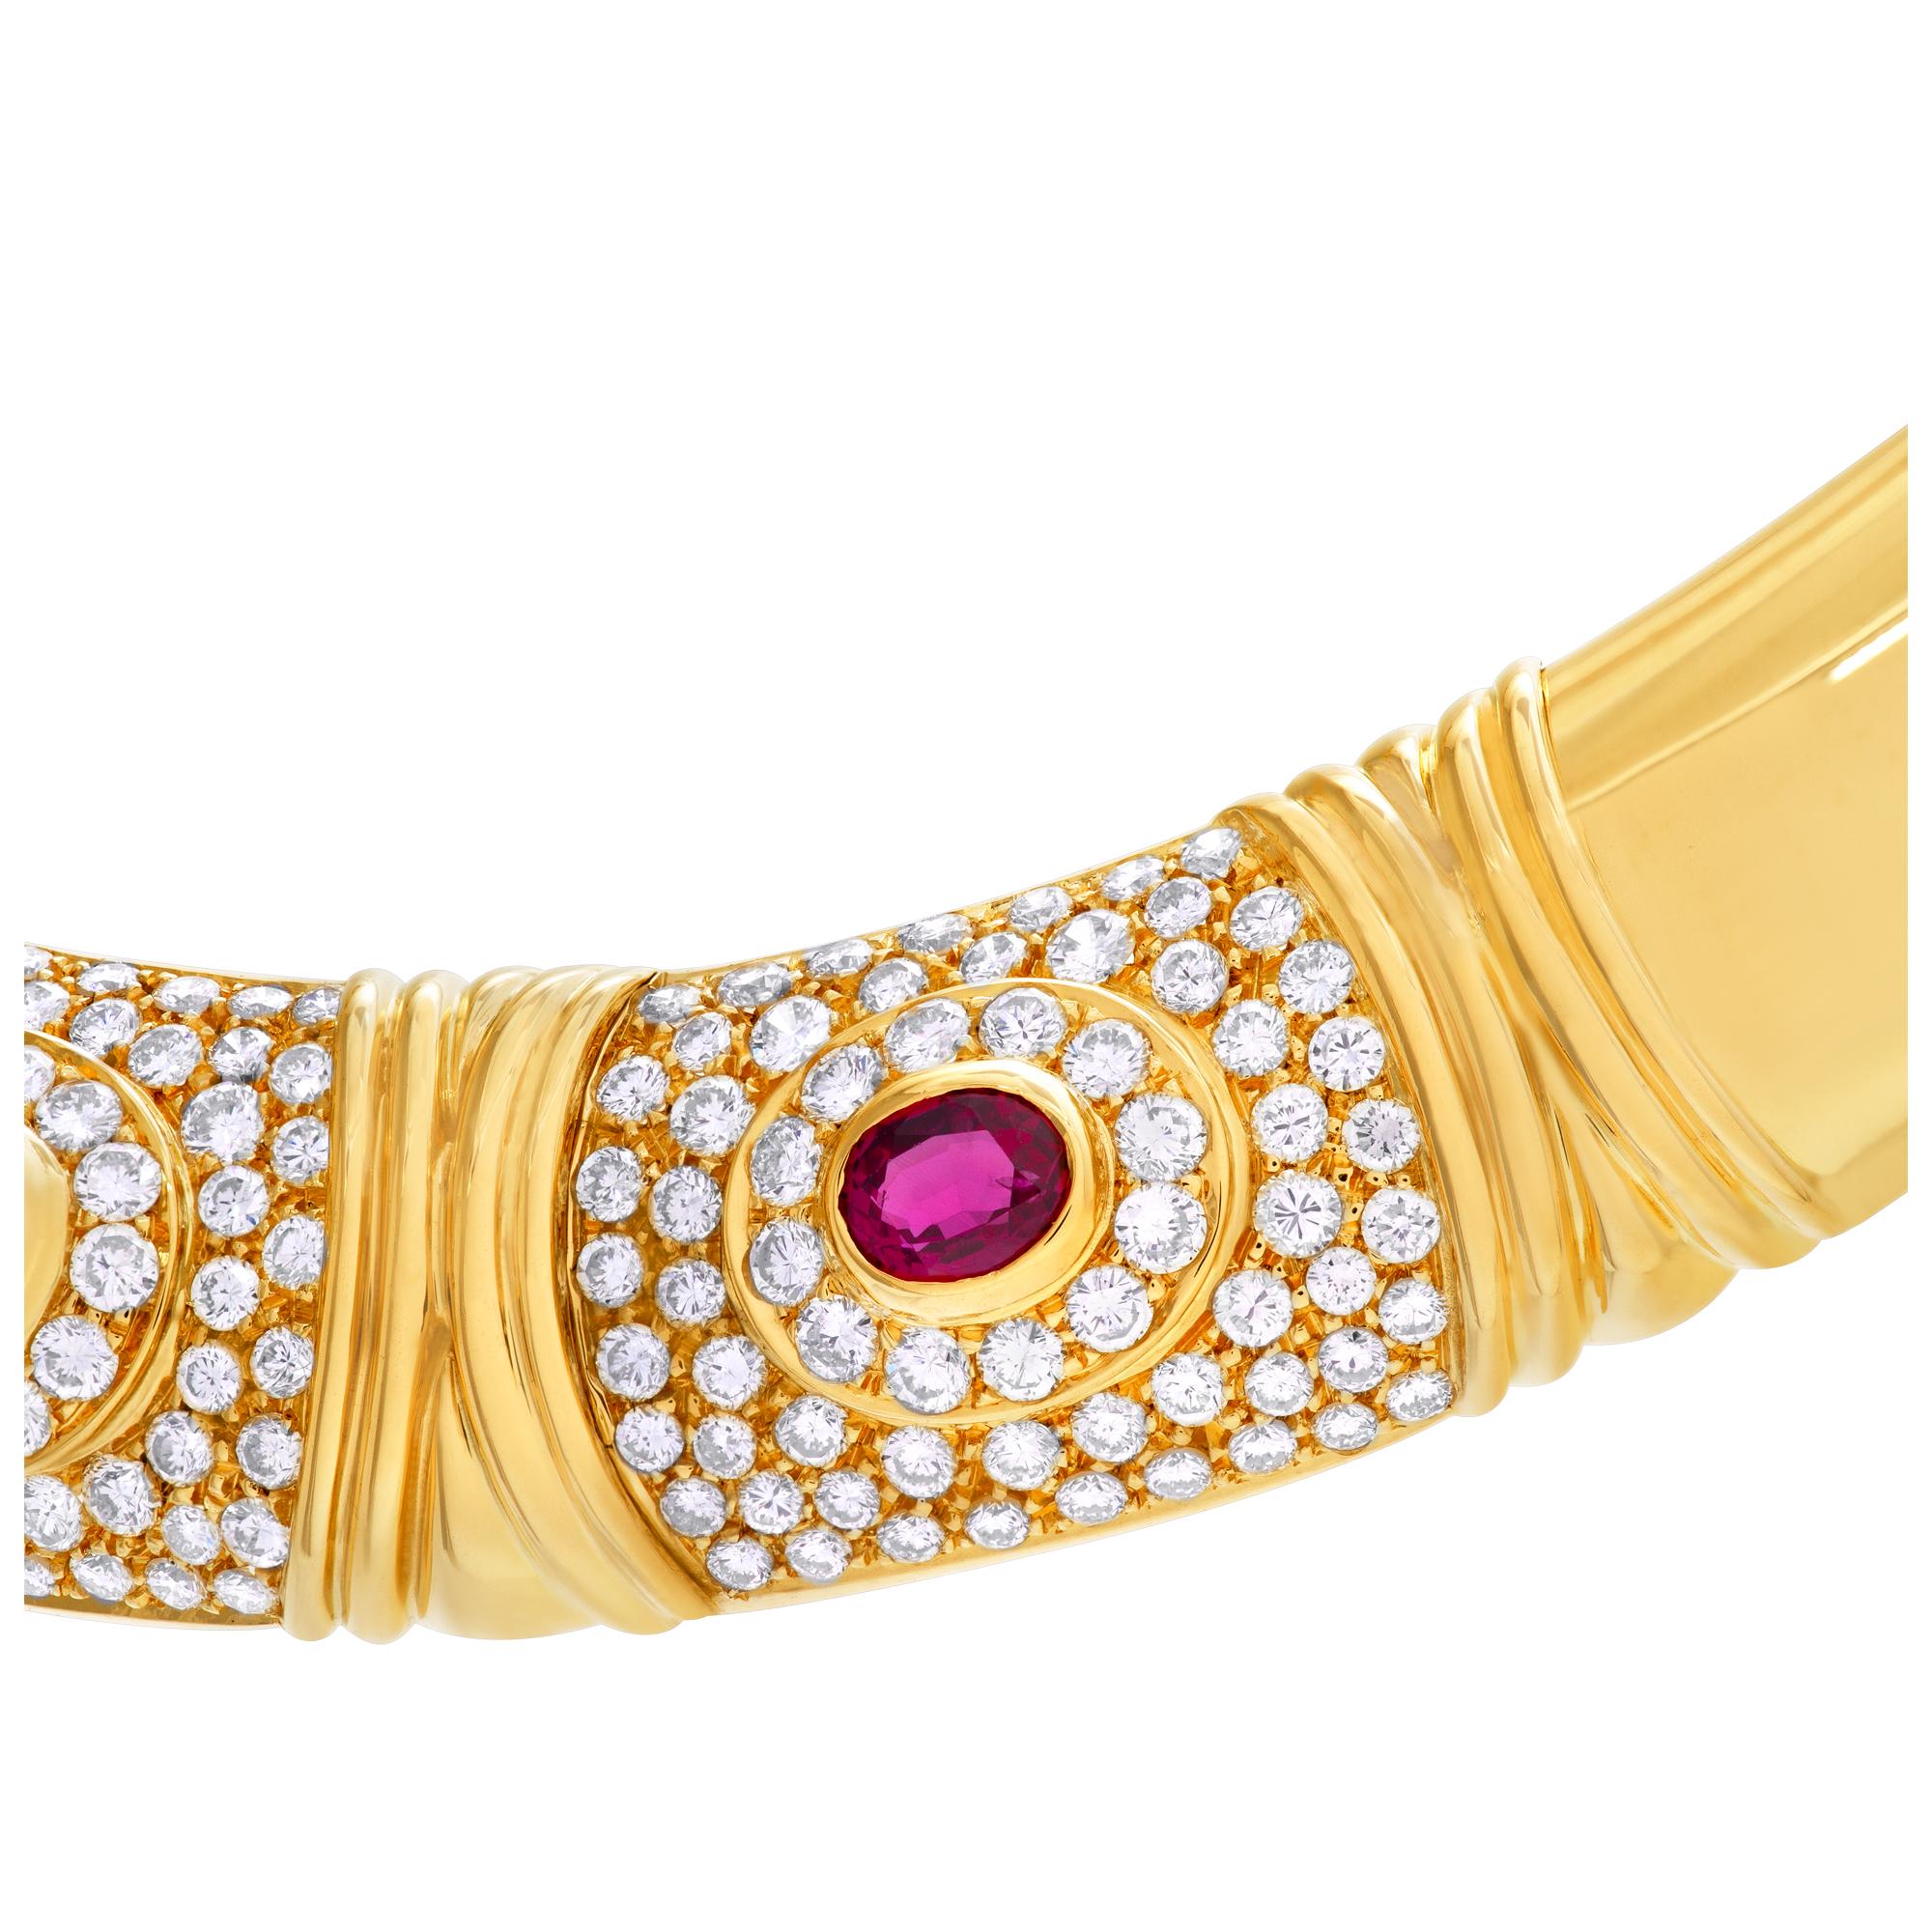 Bvlgari Necklace in 18k Gold with Diamonds, Ruby, Emerald and Sapphire 1